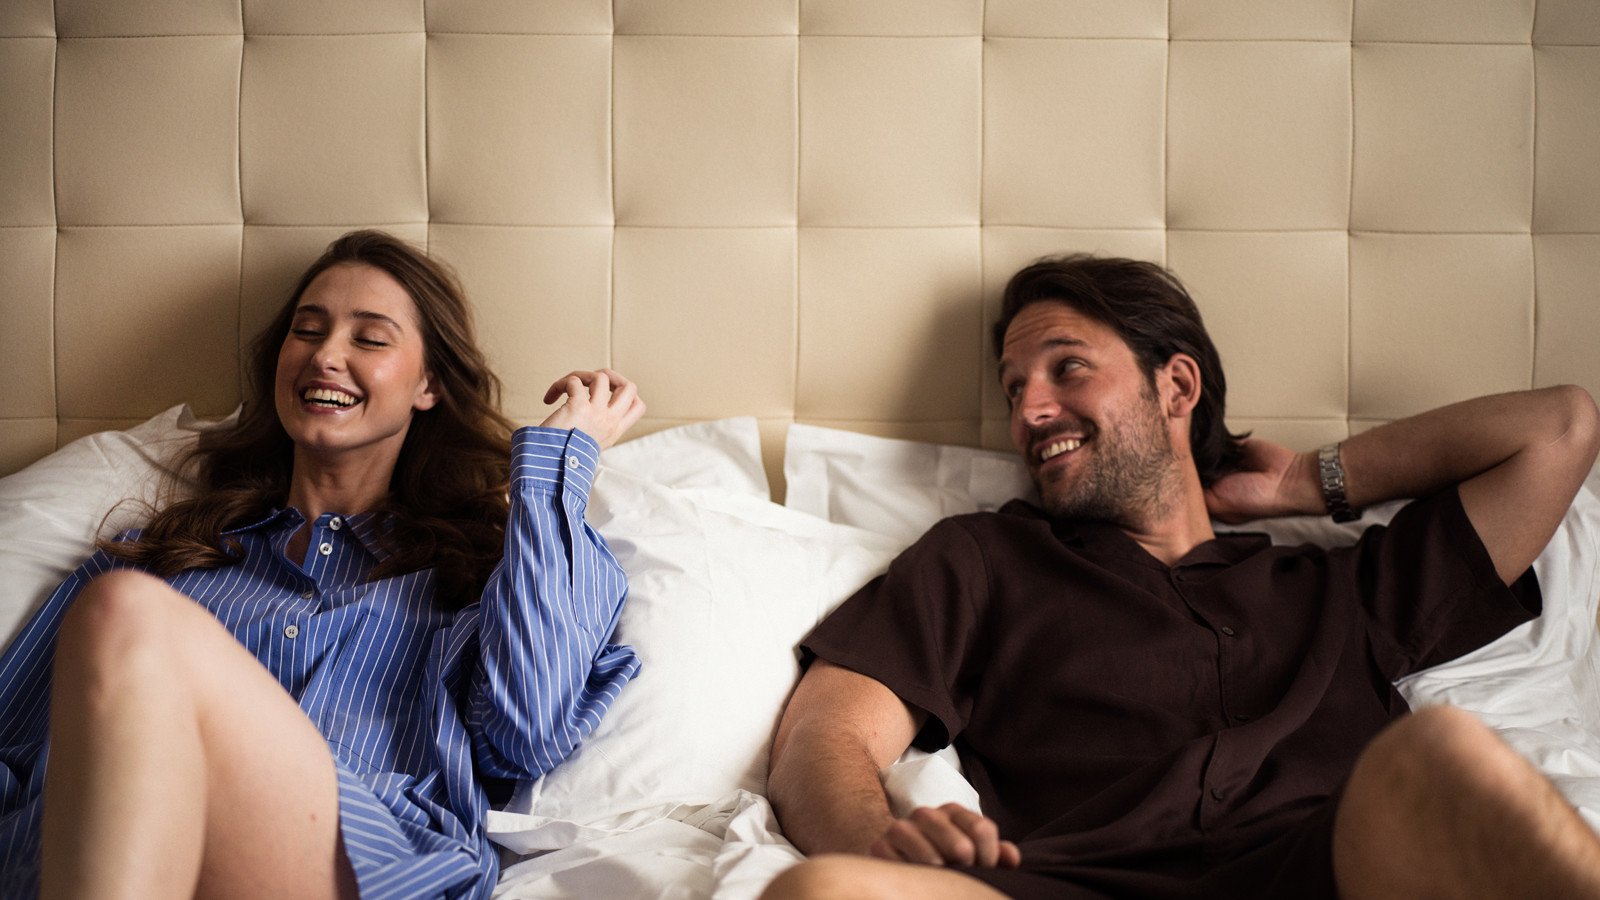 Laughing women and man in hotel bed